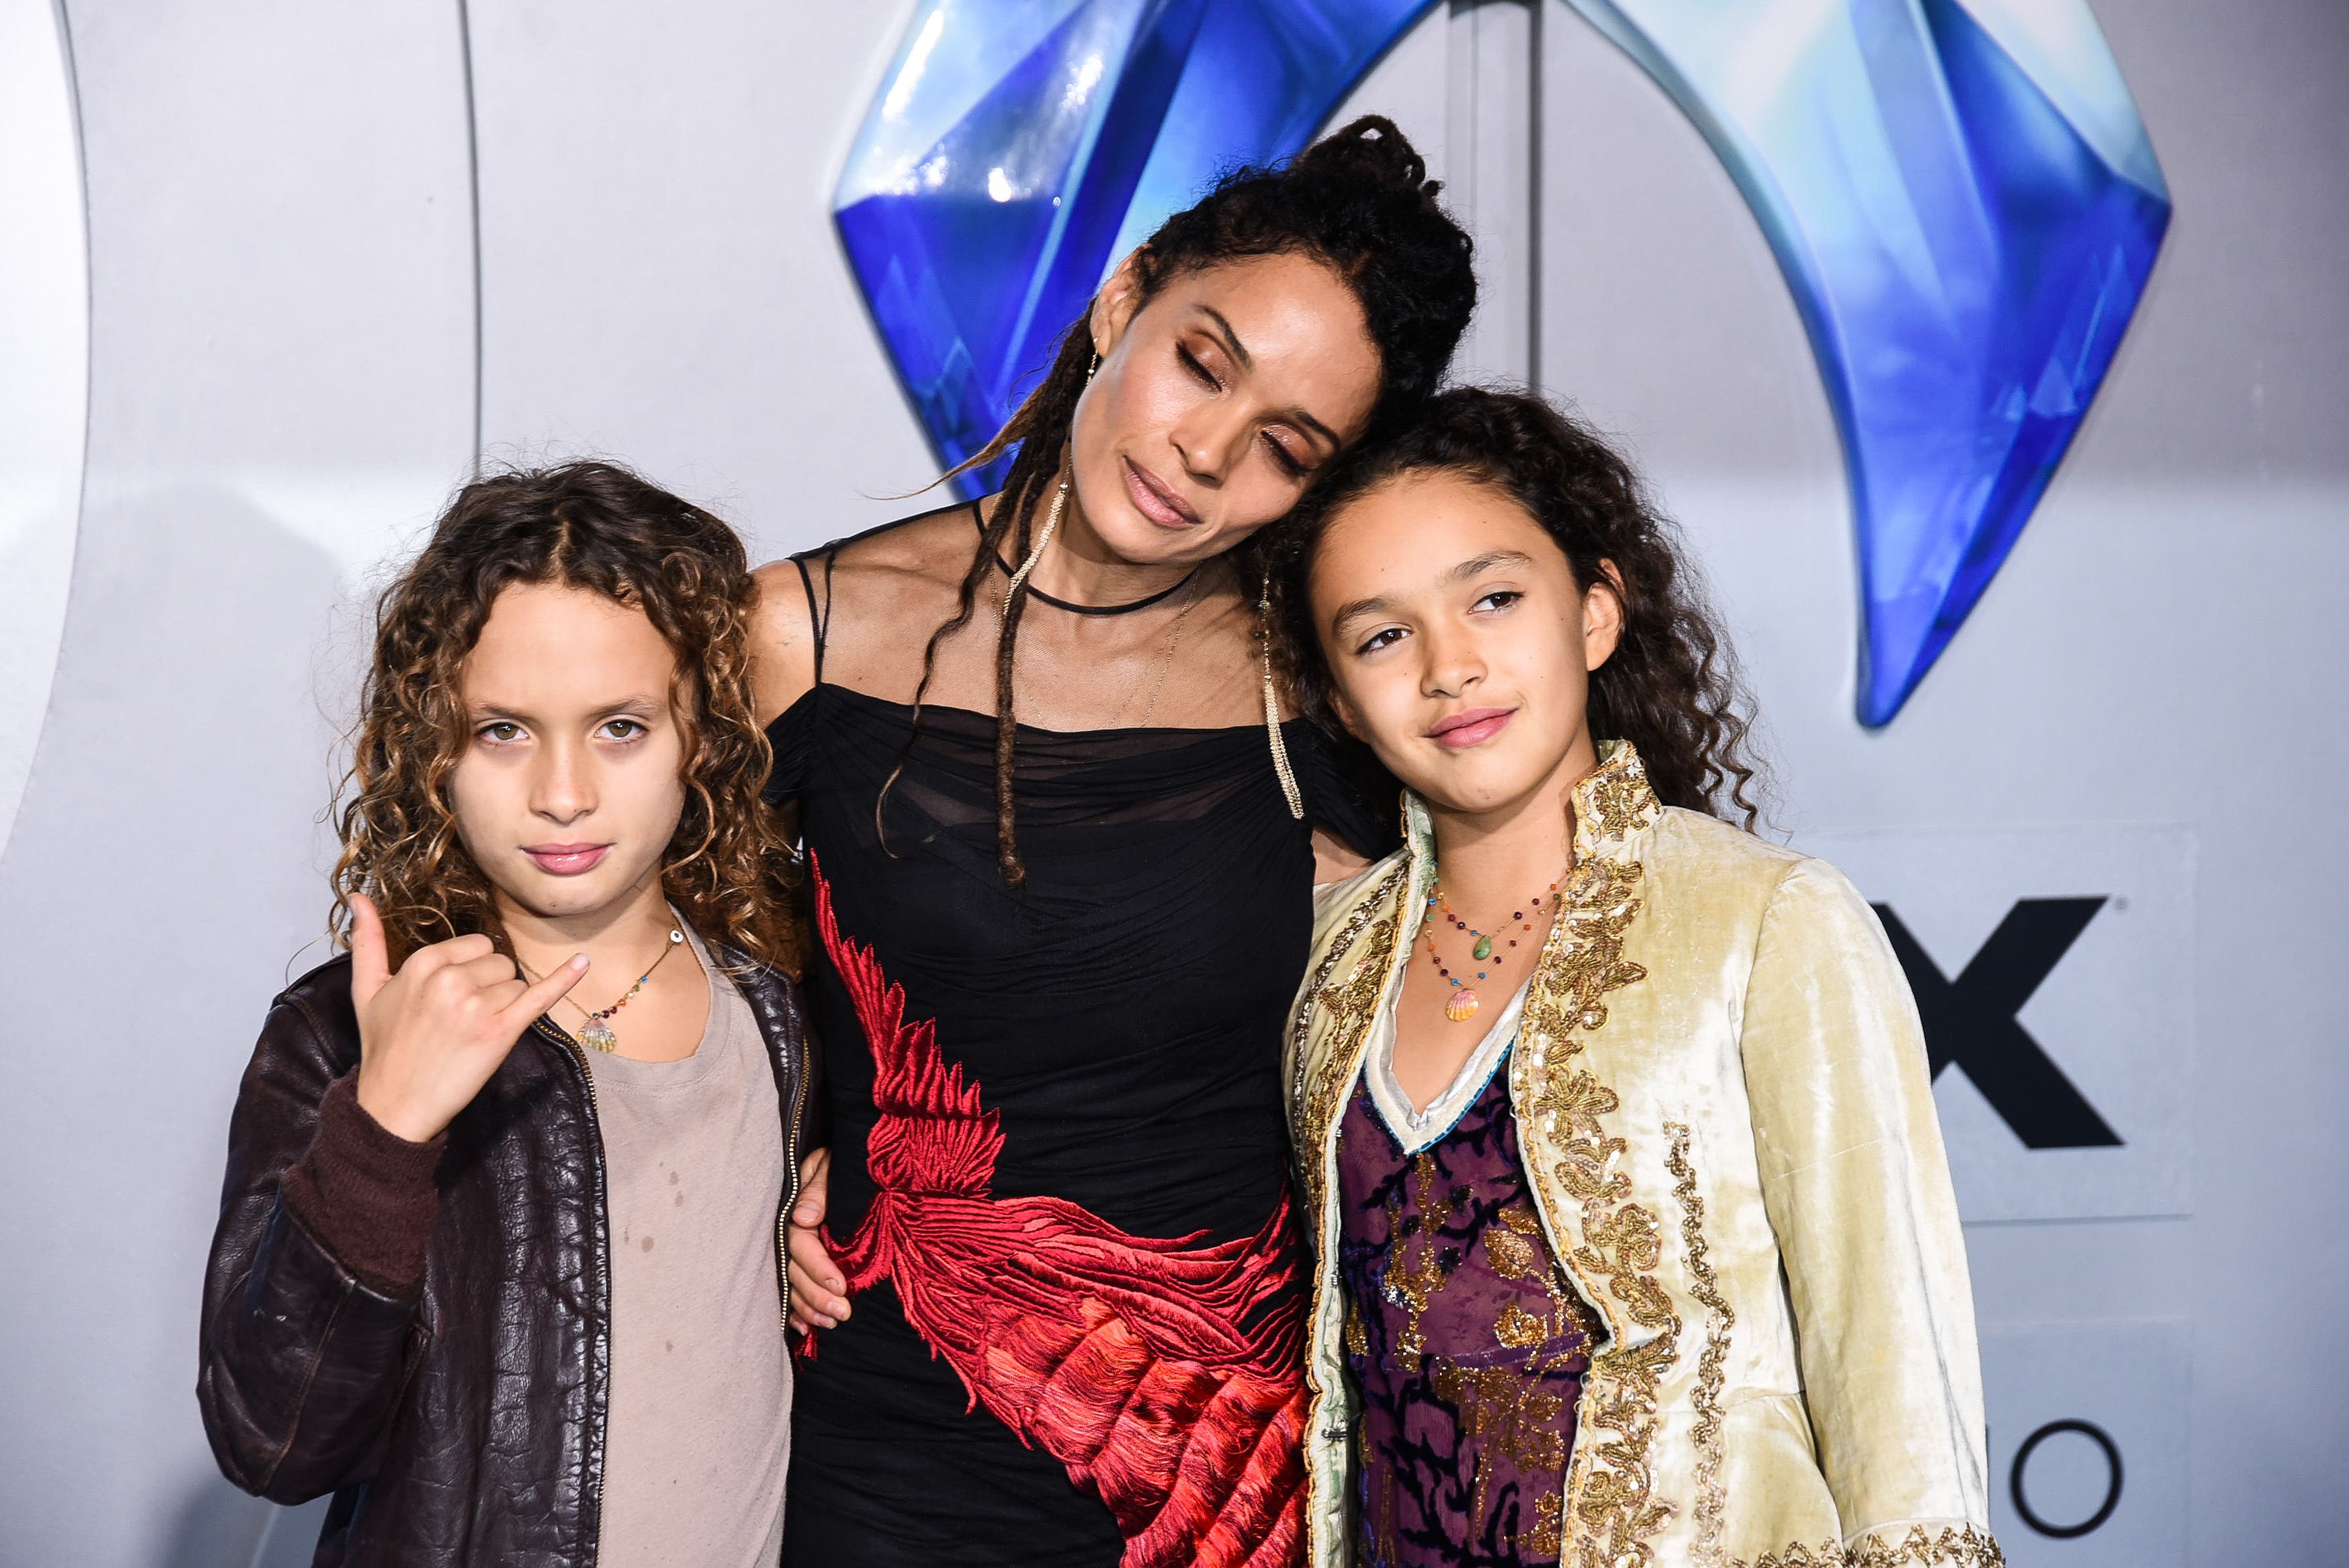 Lisa Bonet, Lola and Nakoa-Wolf at the premiere of  "Aquaman" in 2018 in Hollywood | Source: Getty Images